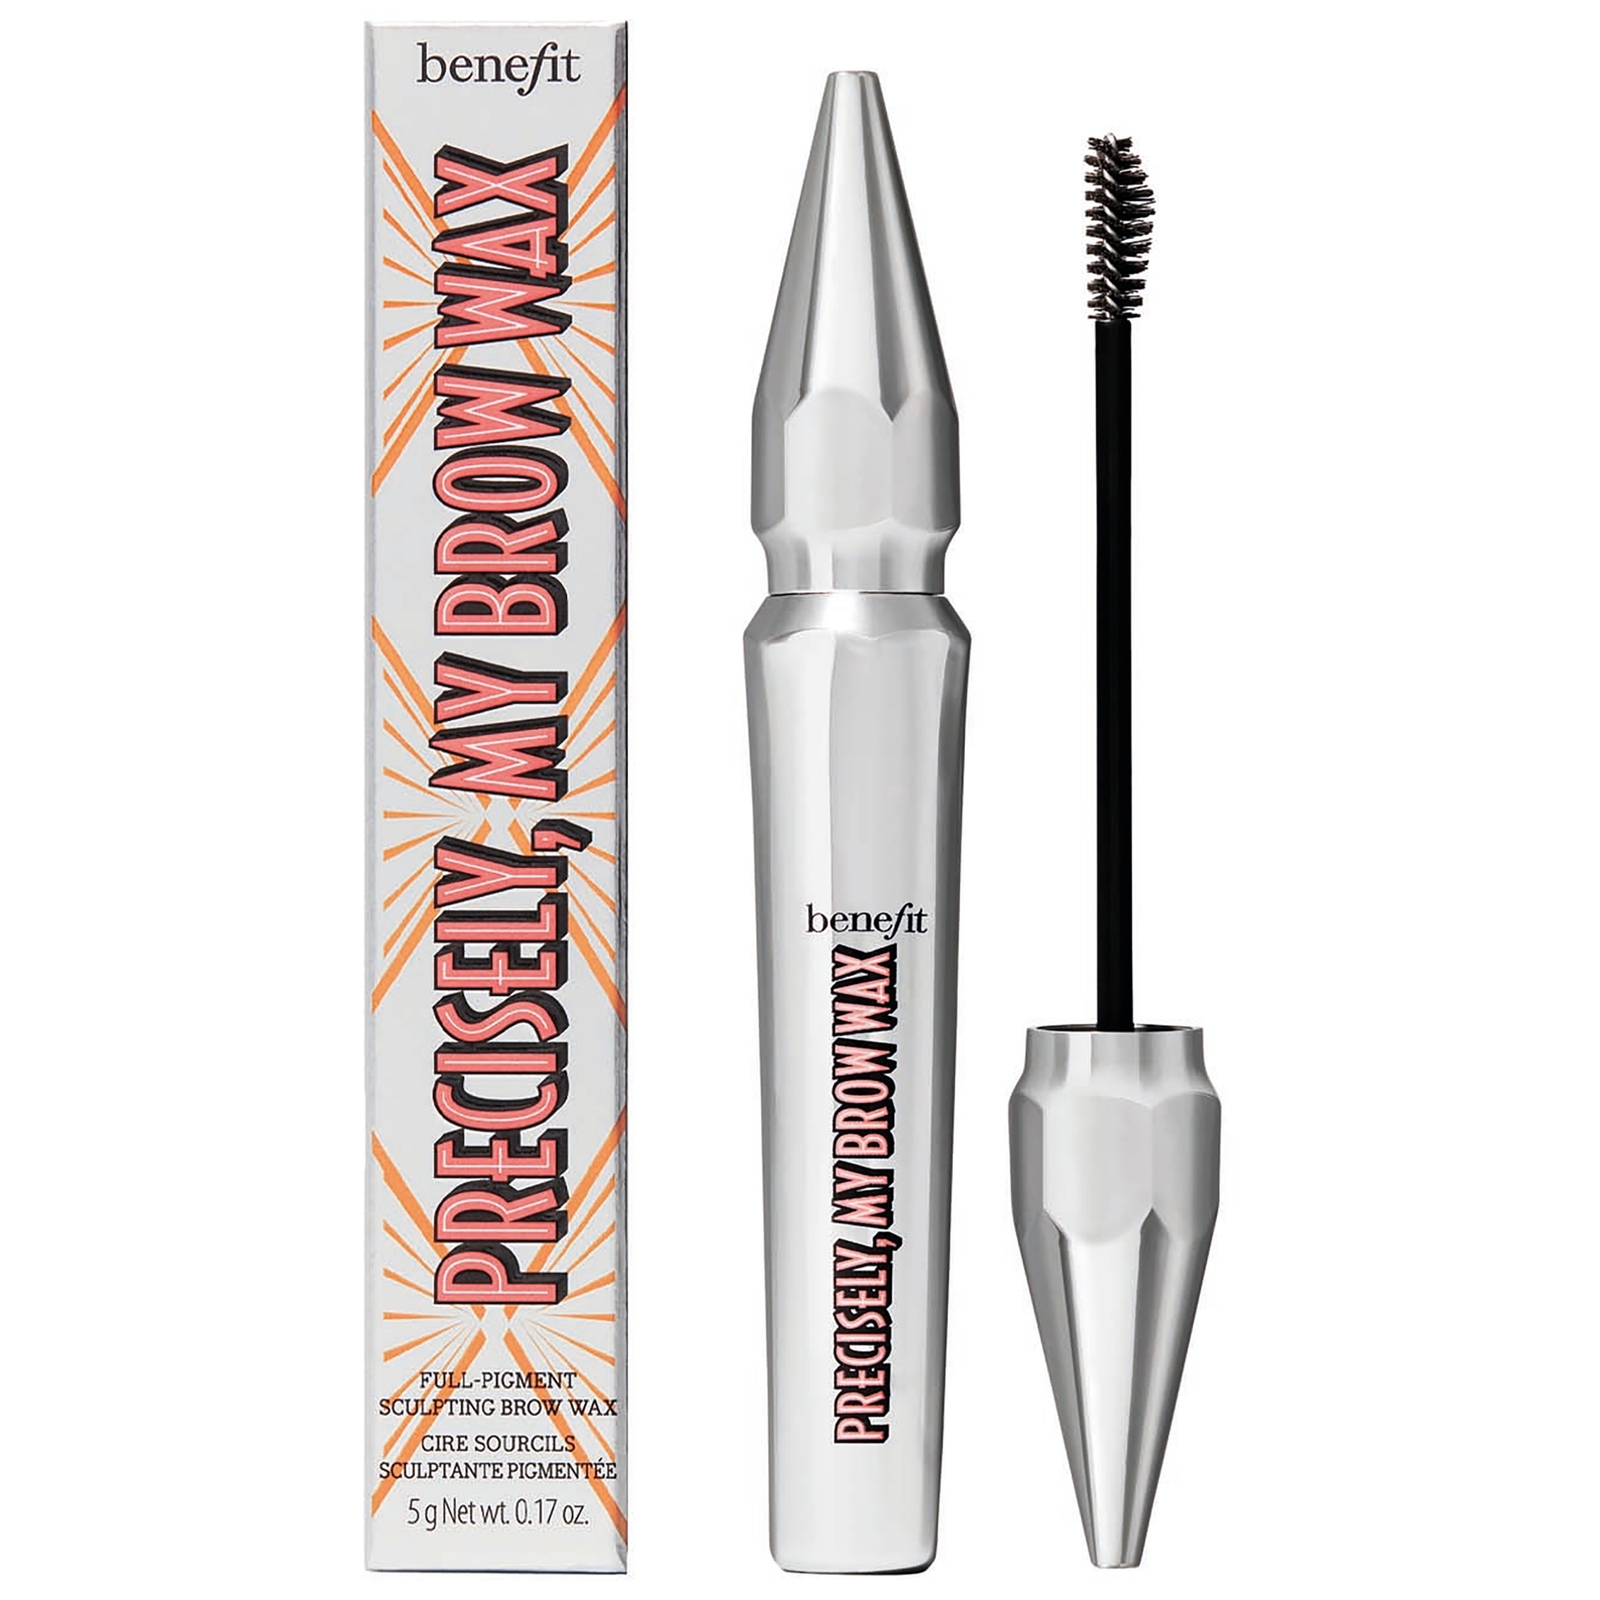 benefit Precisely My Brow Full Pigment Sculpting Brow Wax 5g (Various Shades) - 2 Warm Golden Blonde